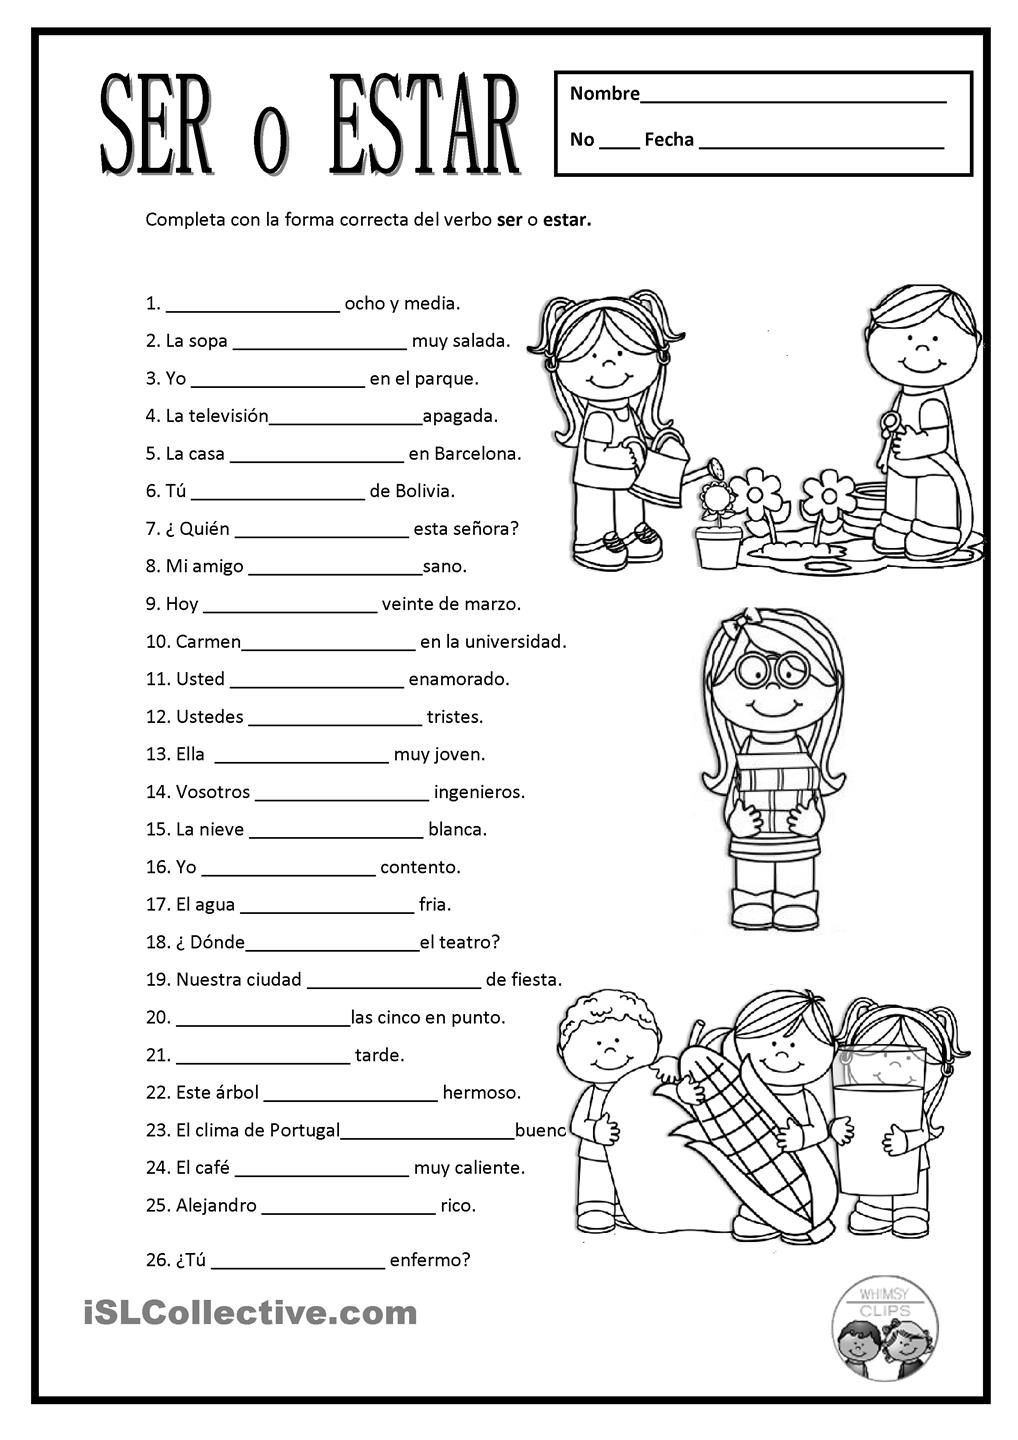 Free Spanish Worksheets  Ser O Estar  For Some Of These, Either